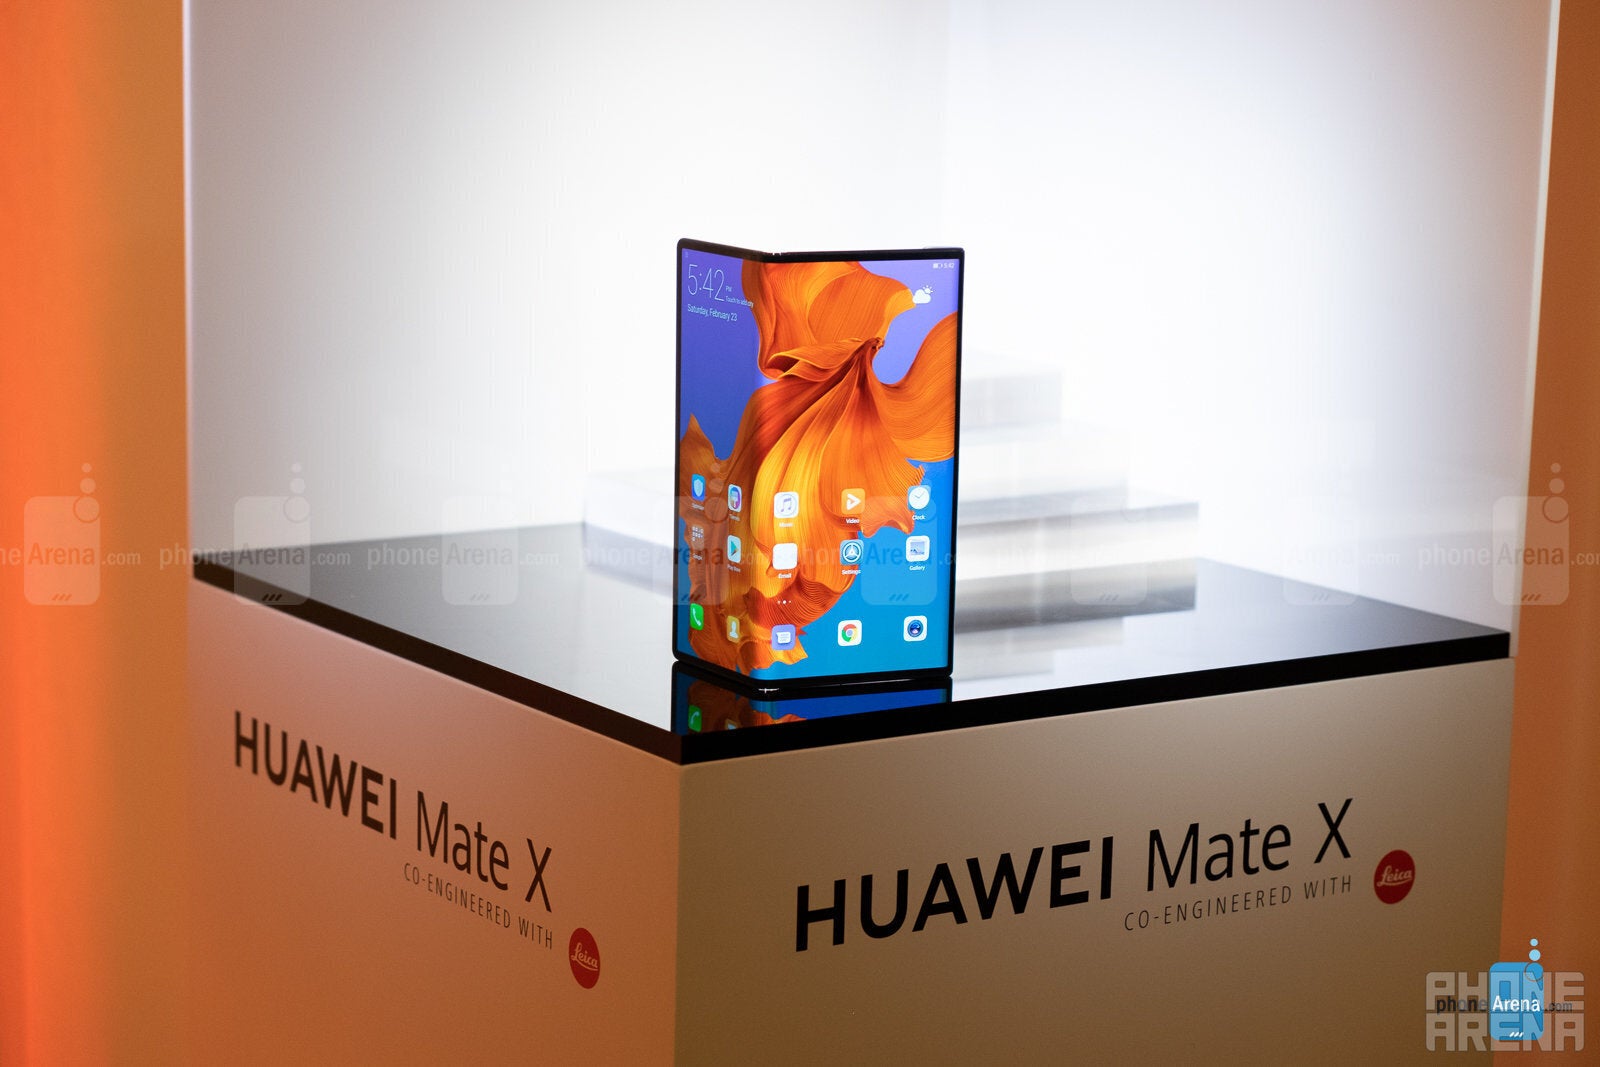 The Huawei Mate X should probably be cancelled as well - Samsung should just cancel the Galaxy Fold